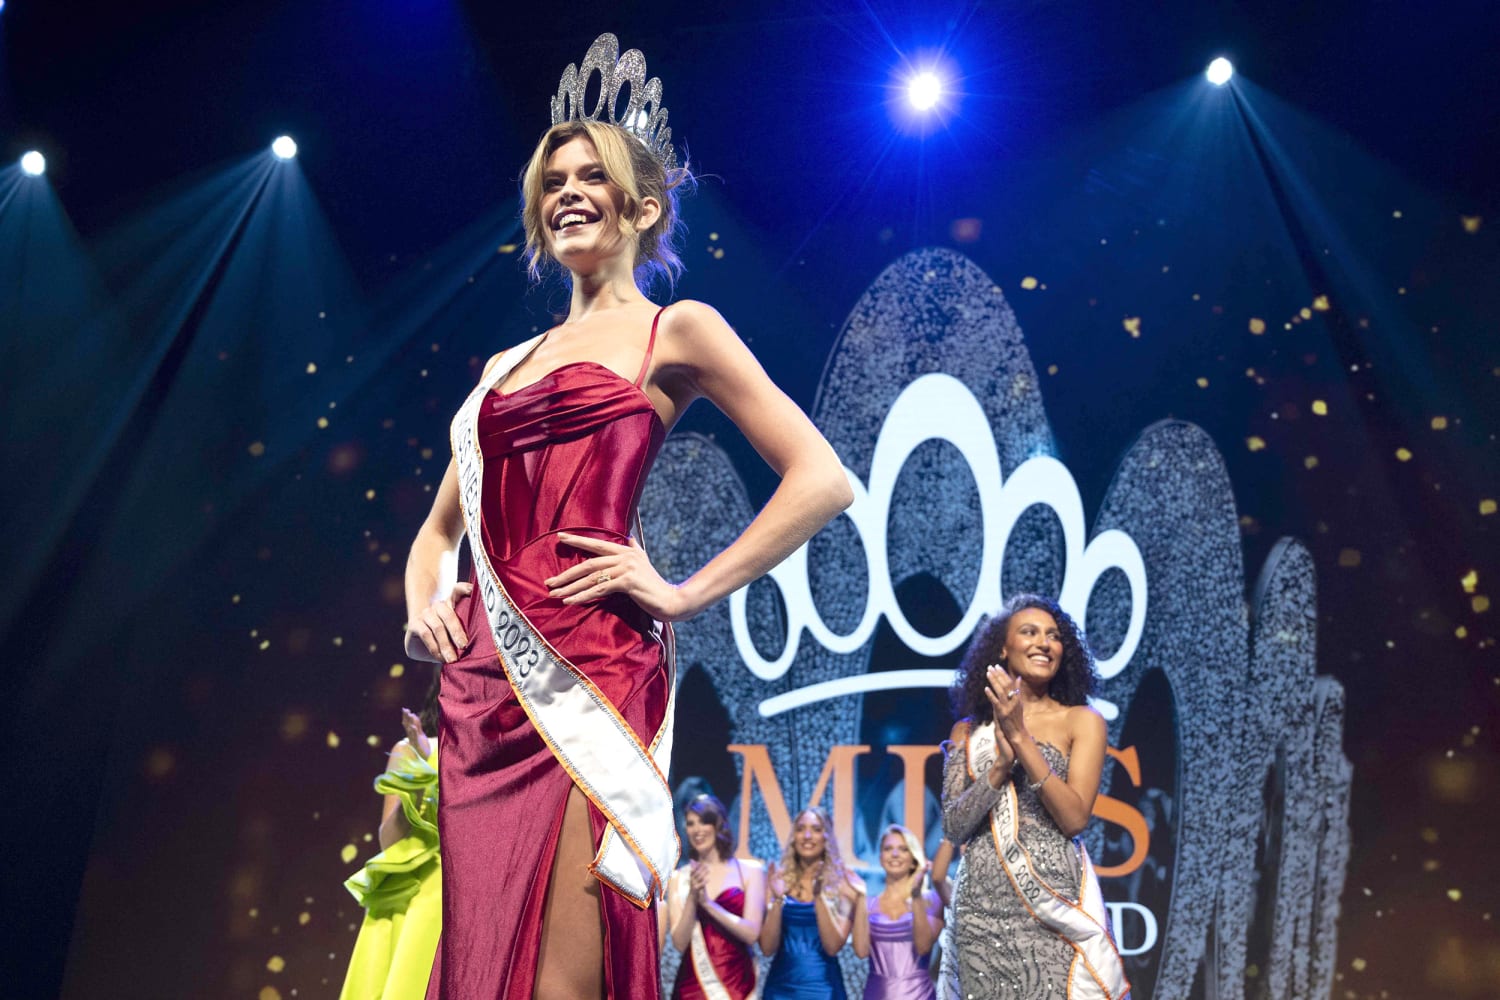 𝗟𝗢𝗢𝗞  More photos of Miss Universe 2023 candidates from